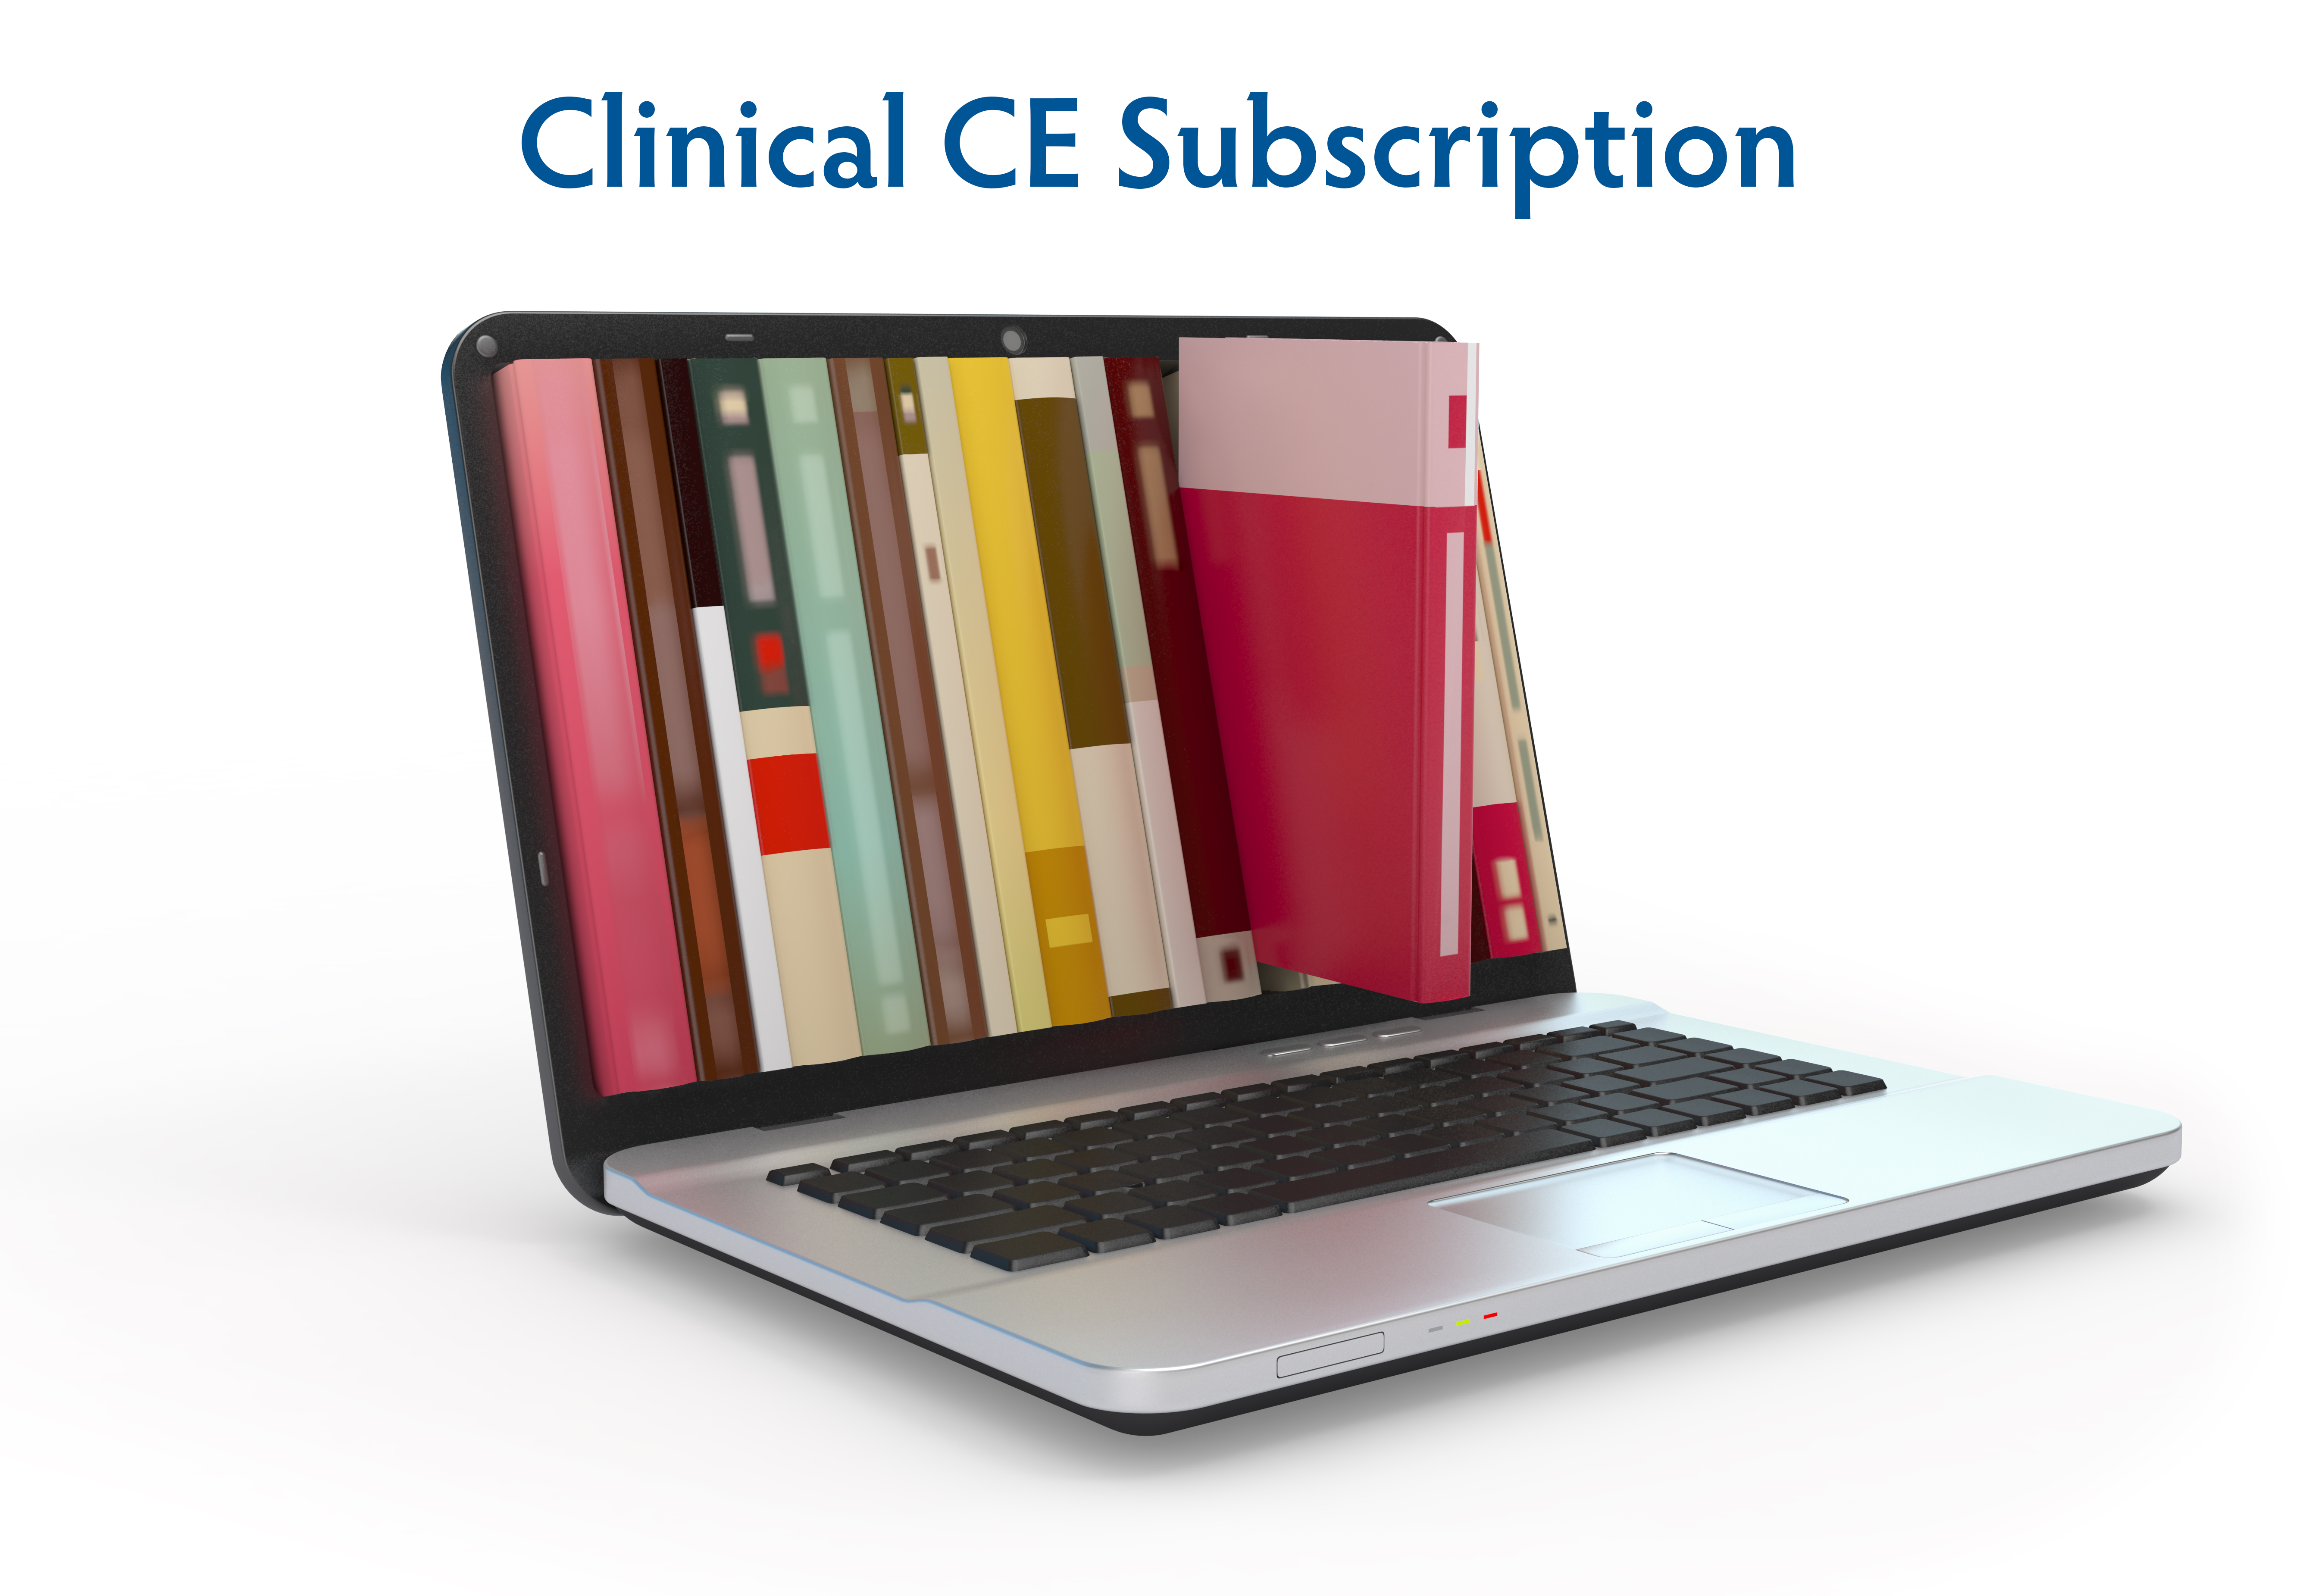 Clinical CE Subscription for OMS Members